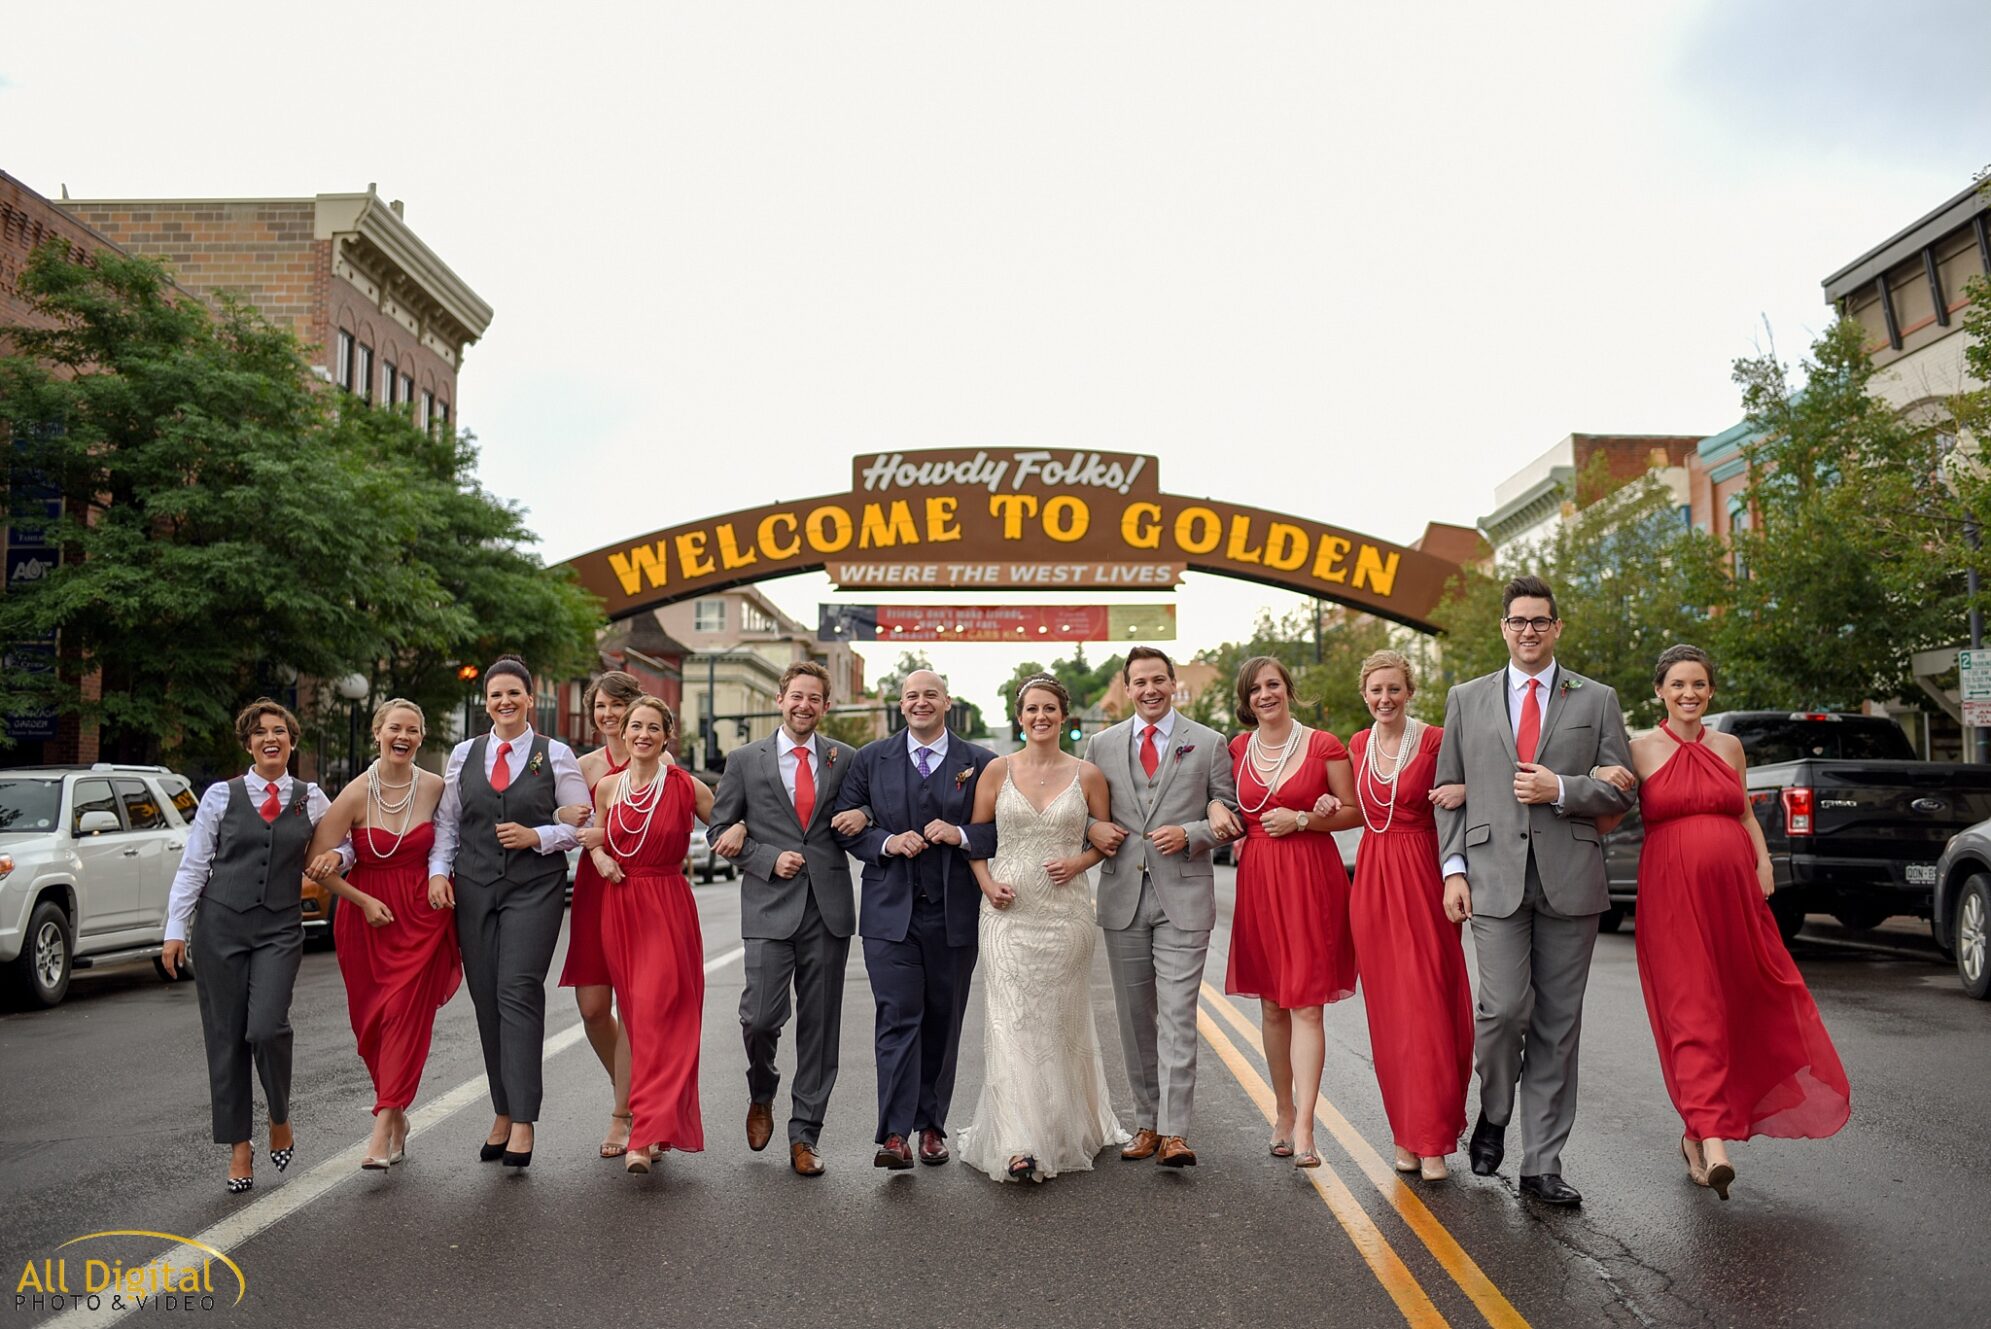 Bridal Party Photos in Downtown Golden photographed by All Digital Studios